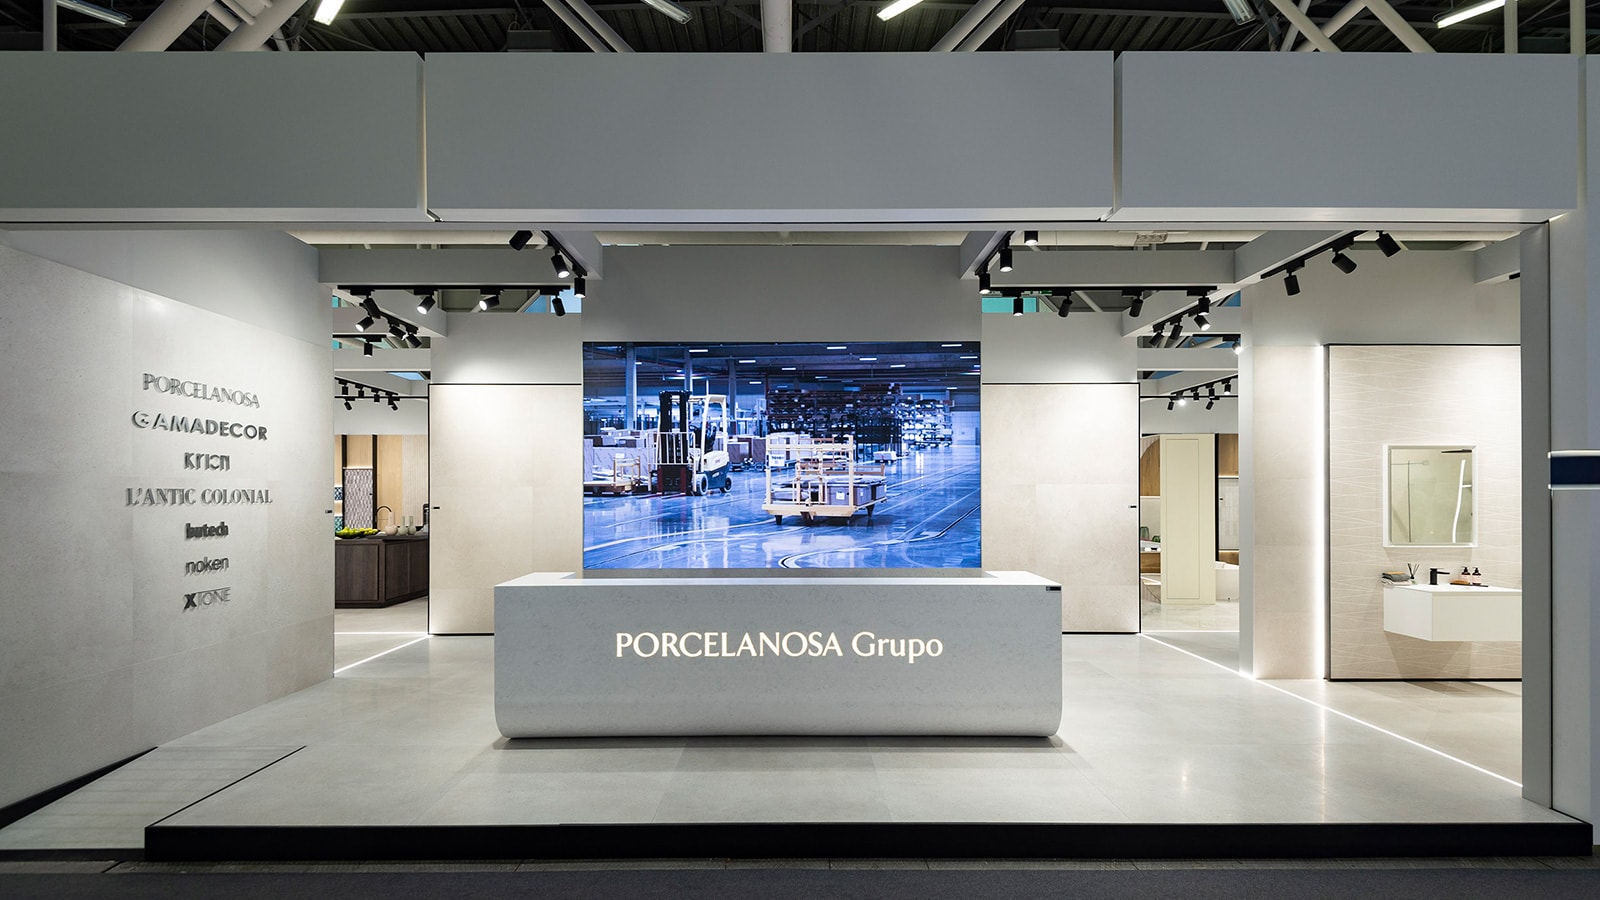 Porcelanosa presents its latest innovations at Cersaie 2022